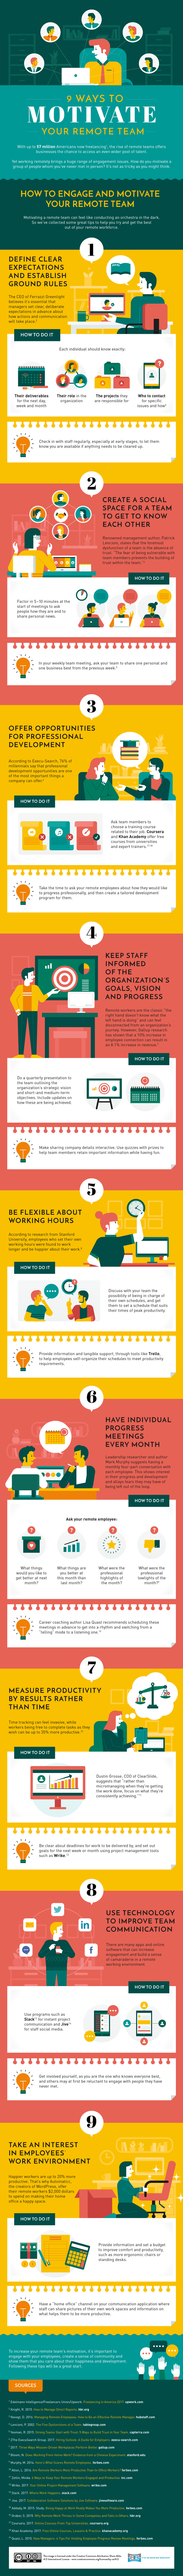 9 Ways to Motivate Your Remote Team #Infographic